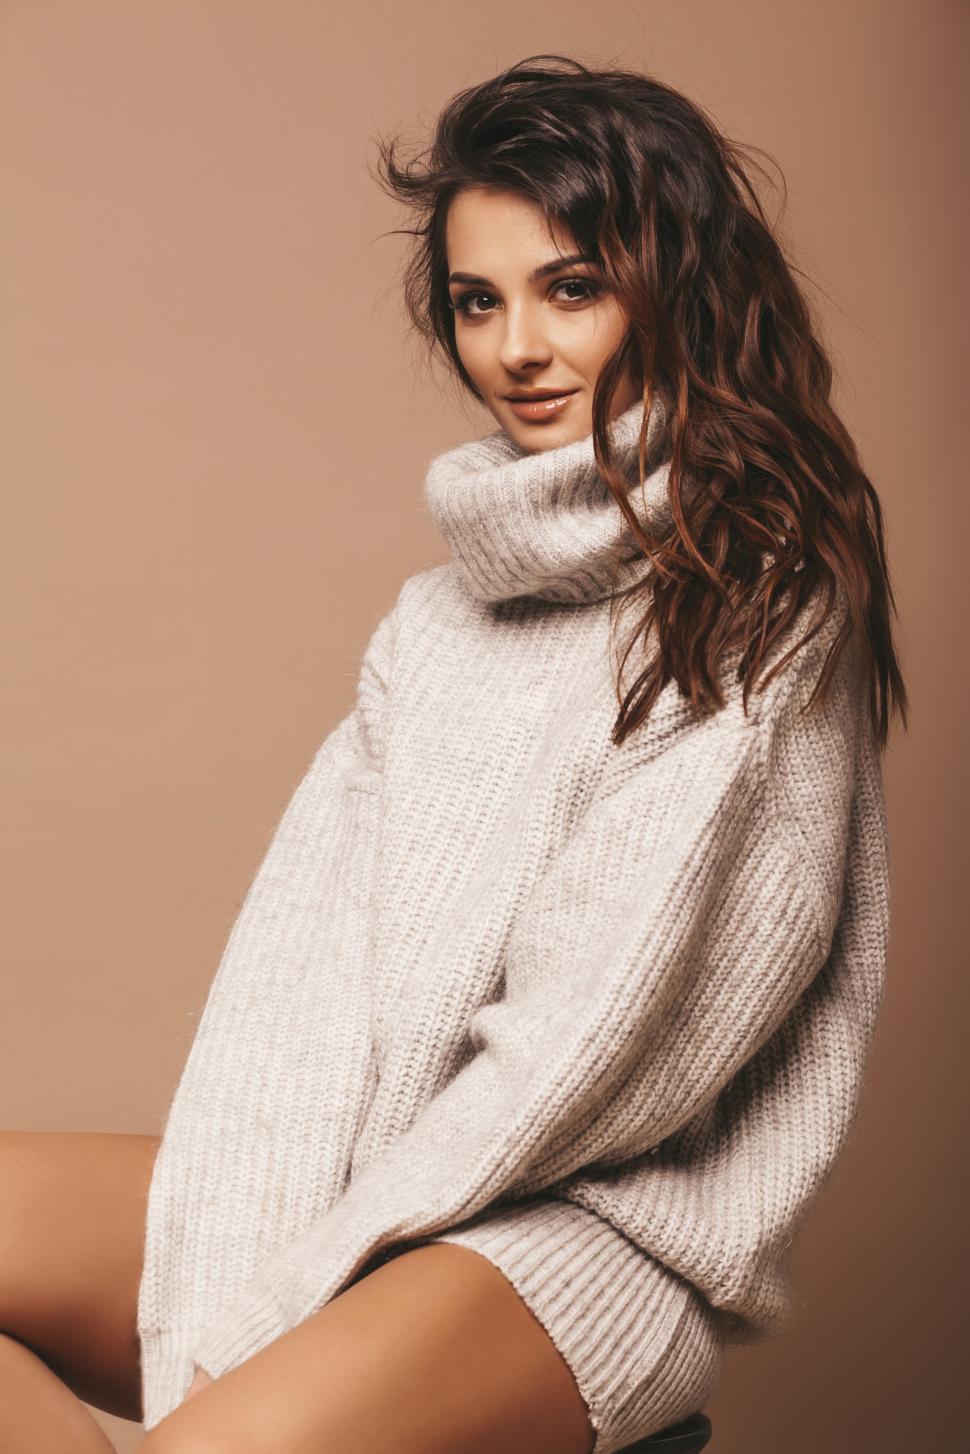 Free Image of A woman in a sweater 